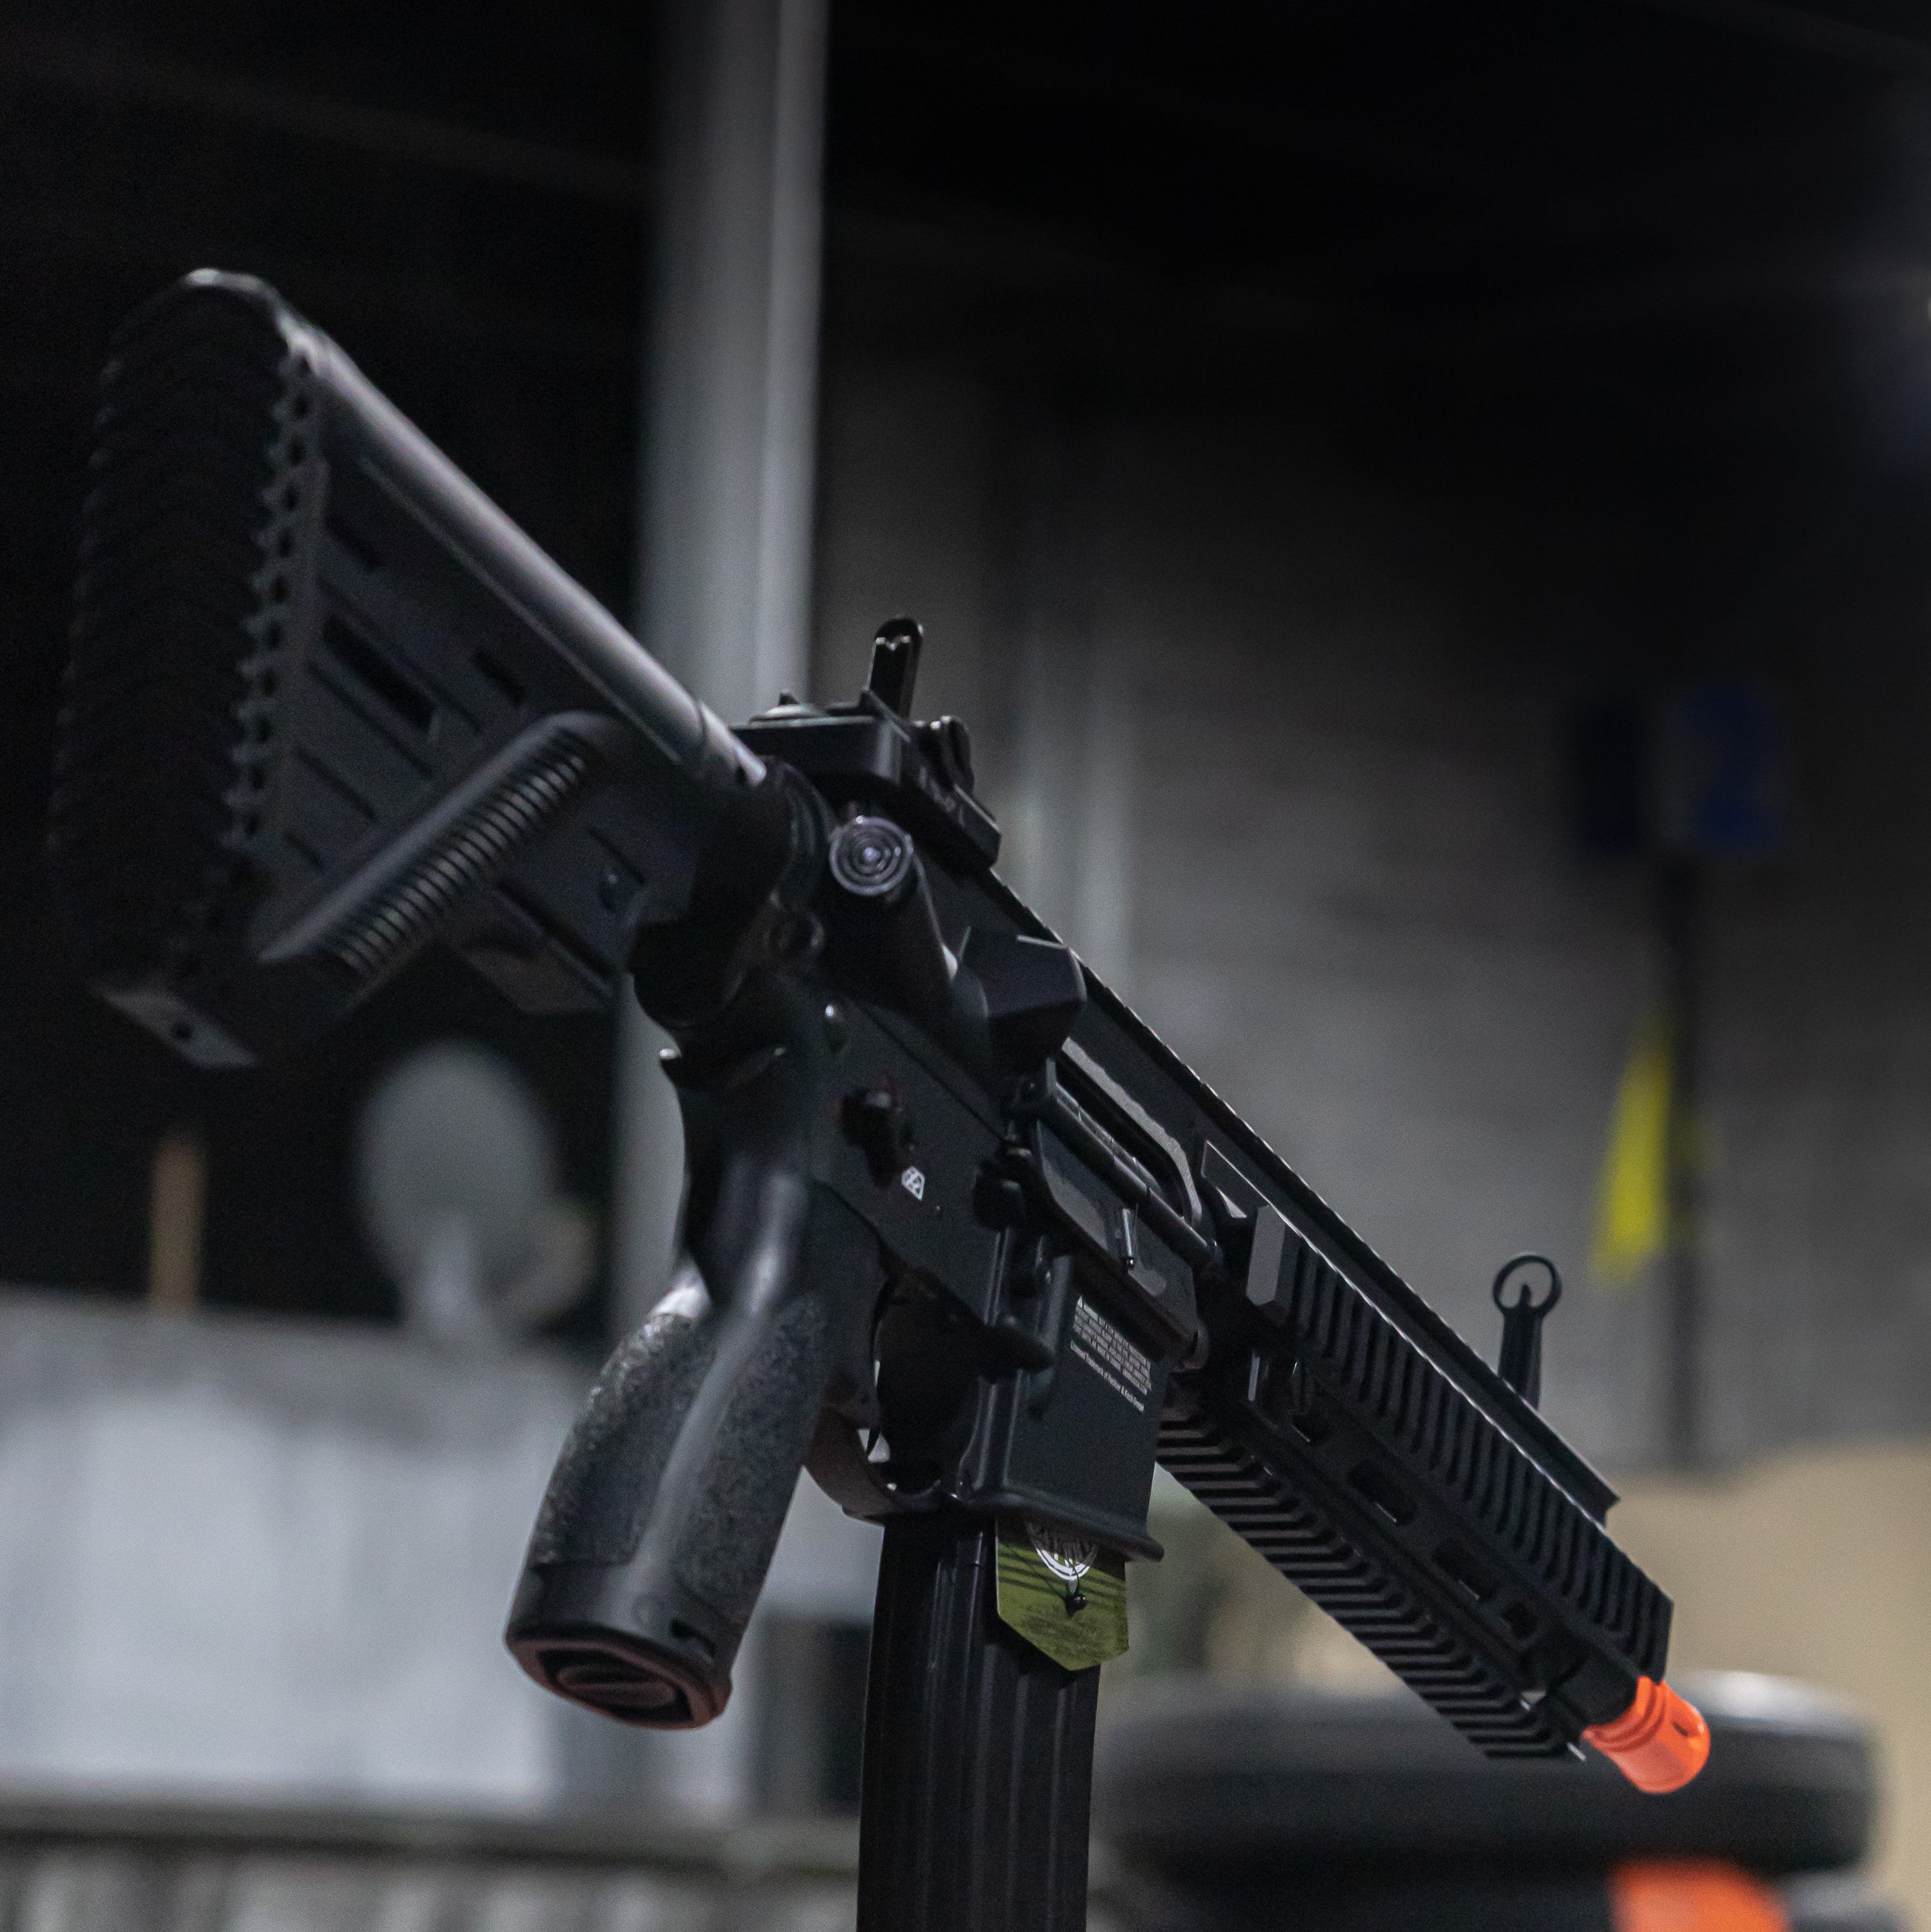 Elite Force Airsoft H&K HK416 Full Size Airsoft AEG Rifle by Umarex Black - ssairsoft.com